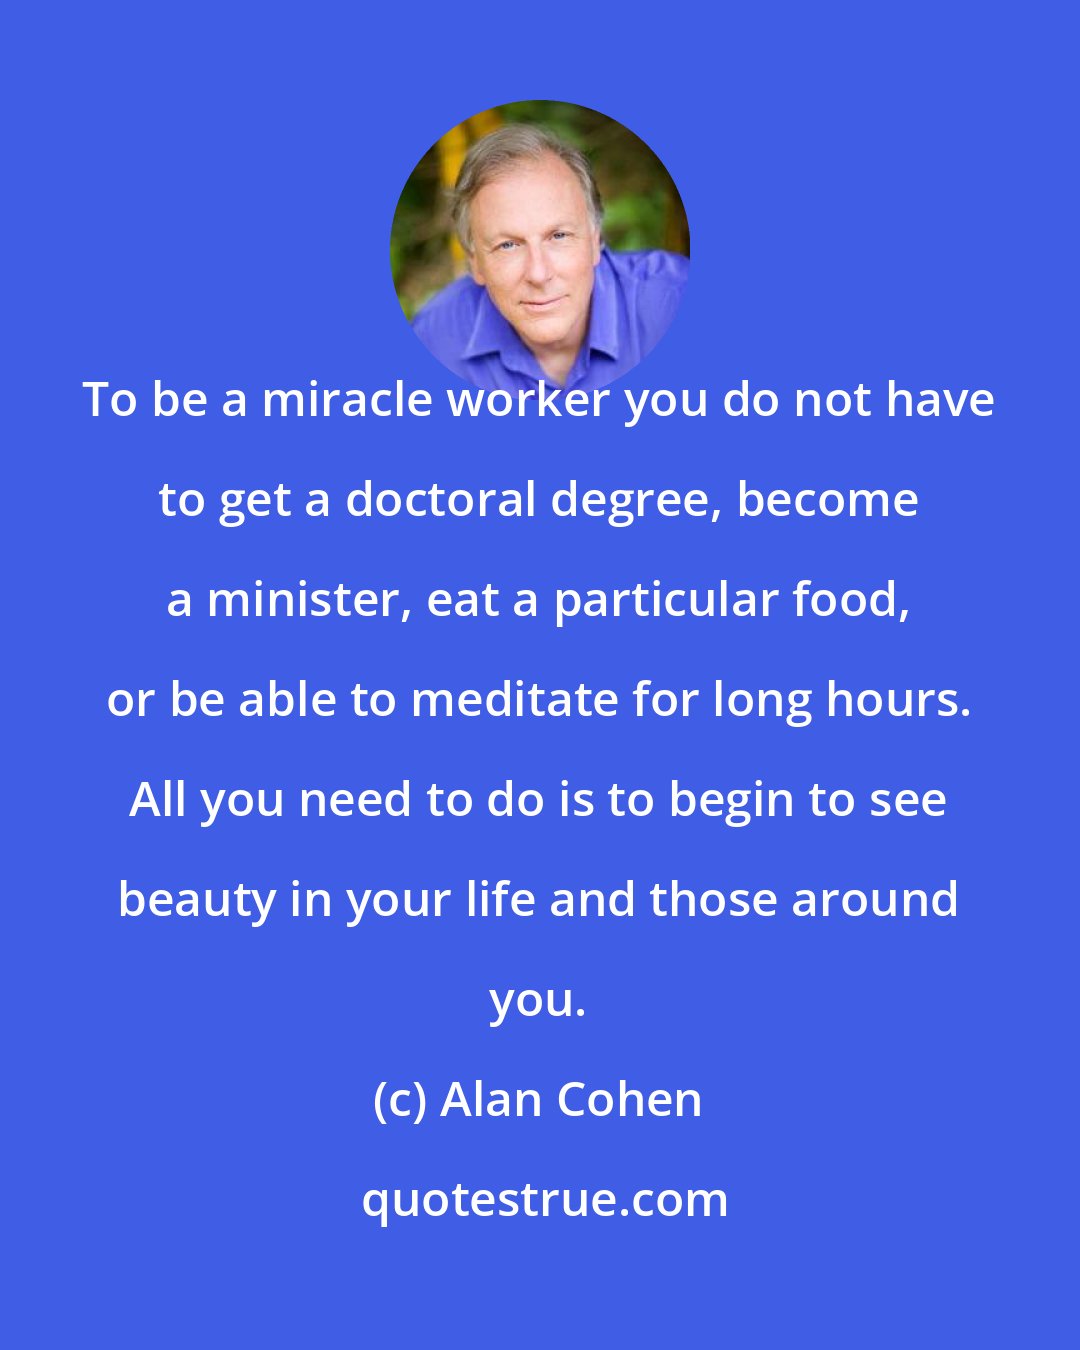 Alan Cohen: To be a miracle worker you do not have to get a doctoral degree, become a minister, eat a particular food, or be able to meditate for long hours. All you need to do is to begin to see beauty in your life and those around you.